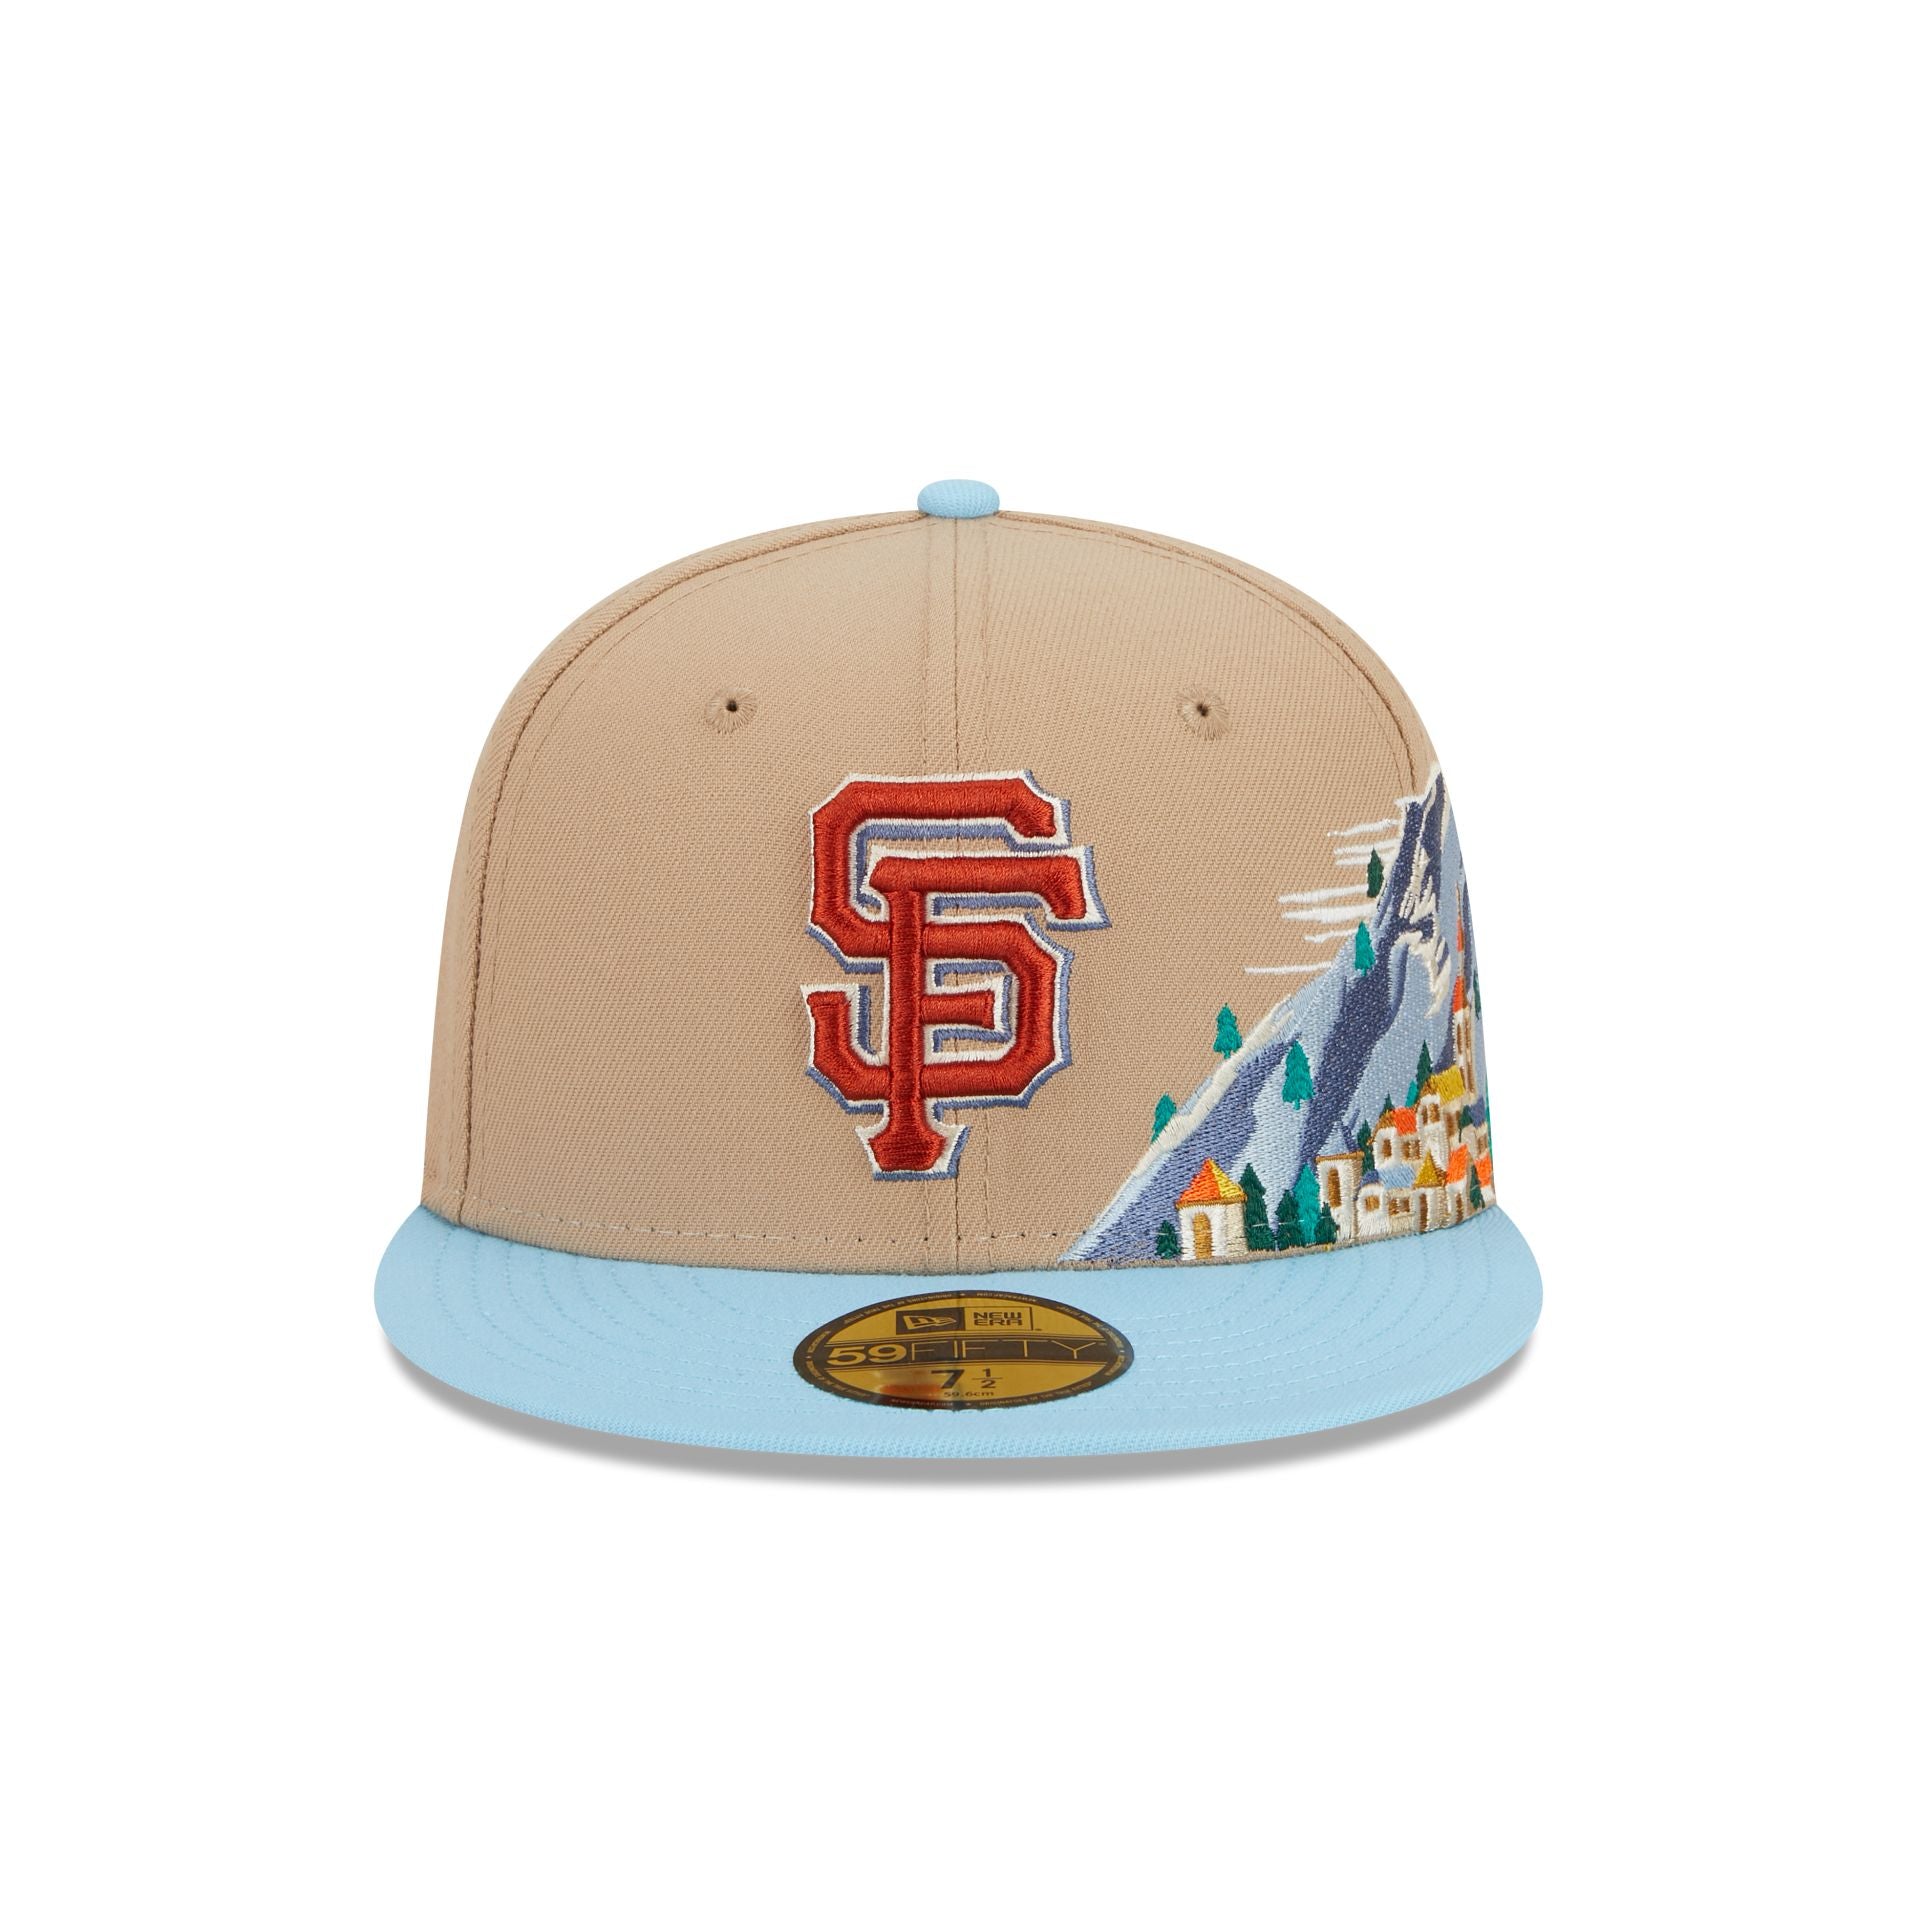 San Francisco Giants Snowcapped 59FIFTY Fitted Hat, Brown - Size: 8, MLB by New Era